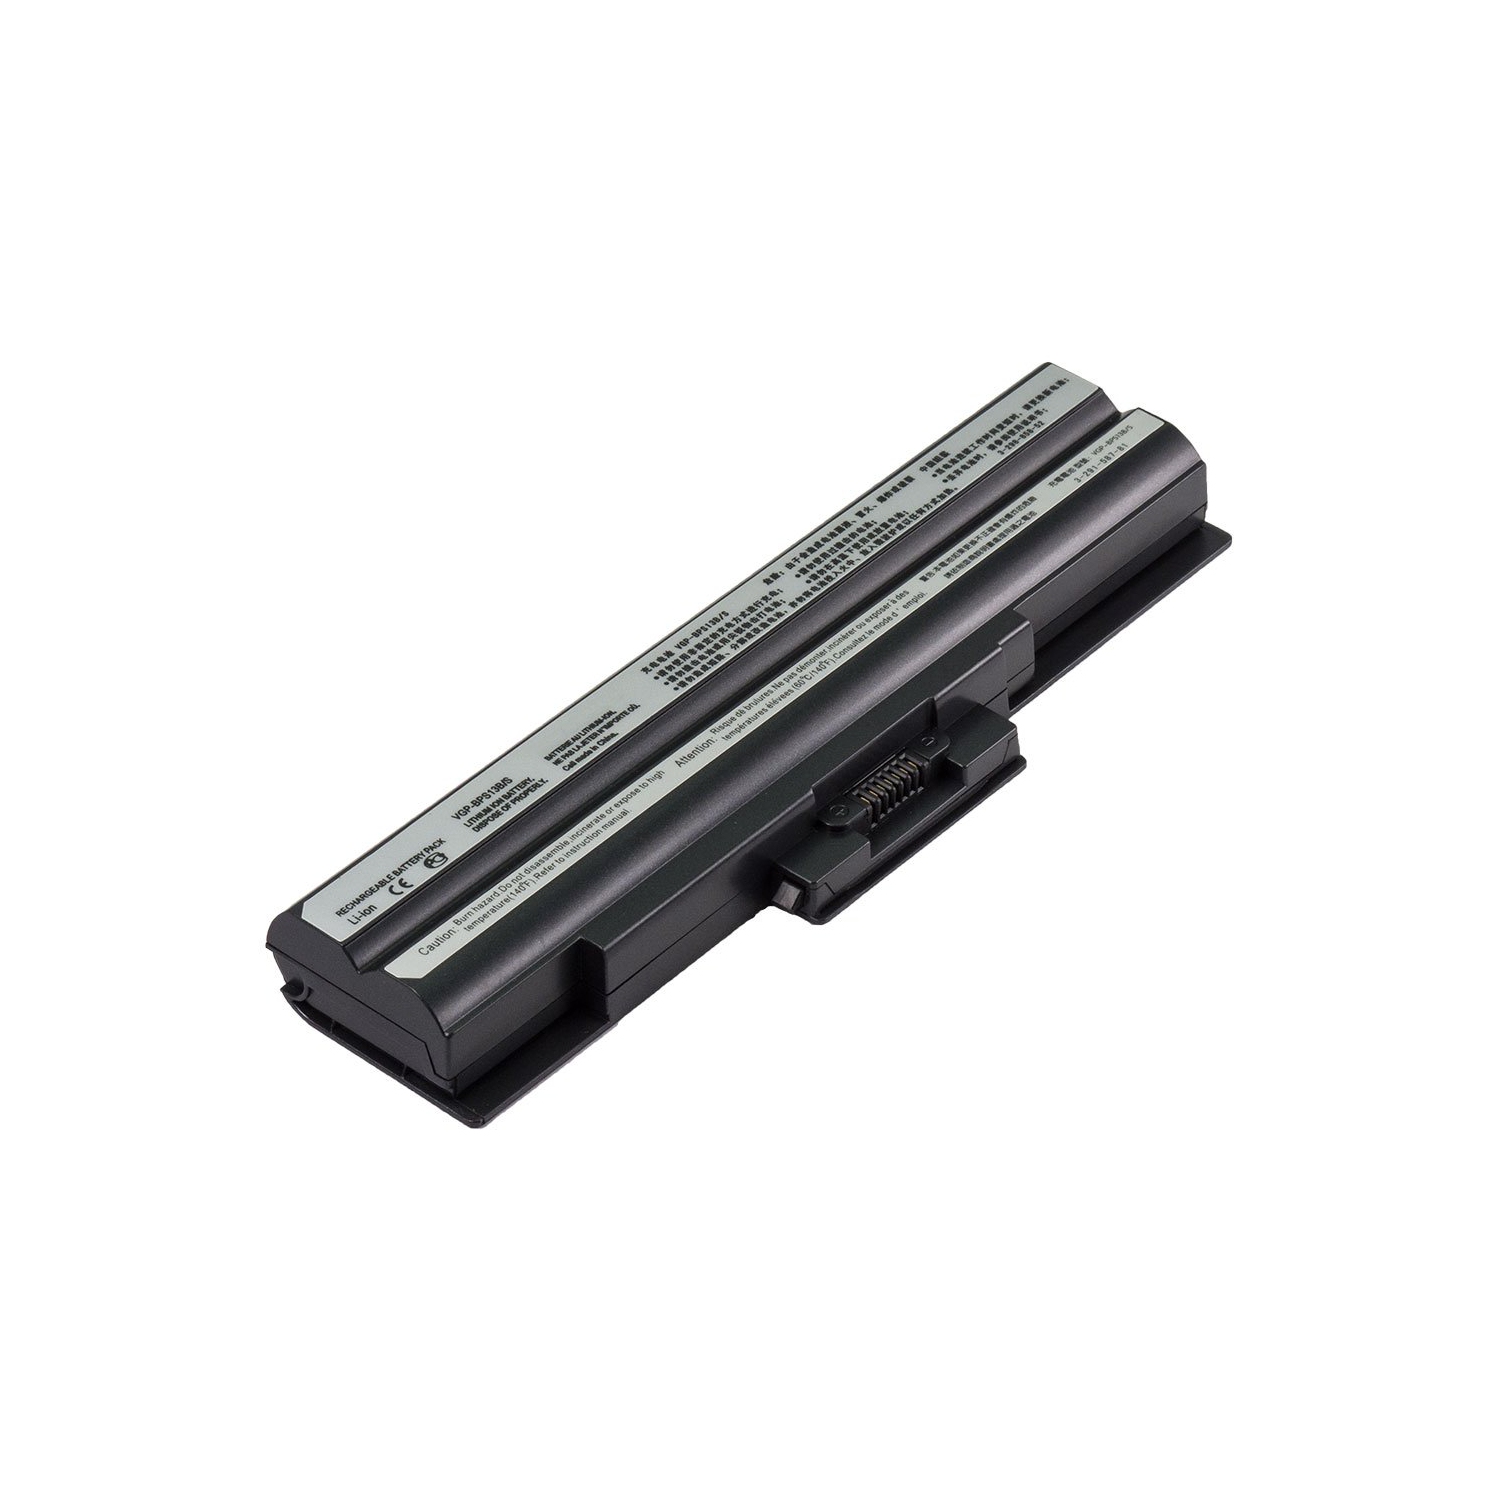 Laptop Battery Replacement for Sony VAIO VGN-SR510G/B, VGP-BPL13, VGP-BPS13/Q, VGP-BPS13A/B, VGP-BPS13A/S, VGP-BPS13A